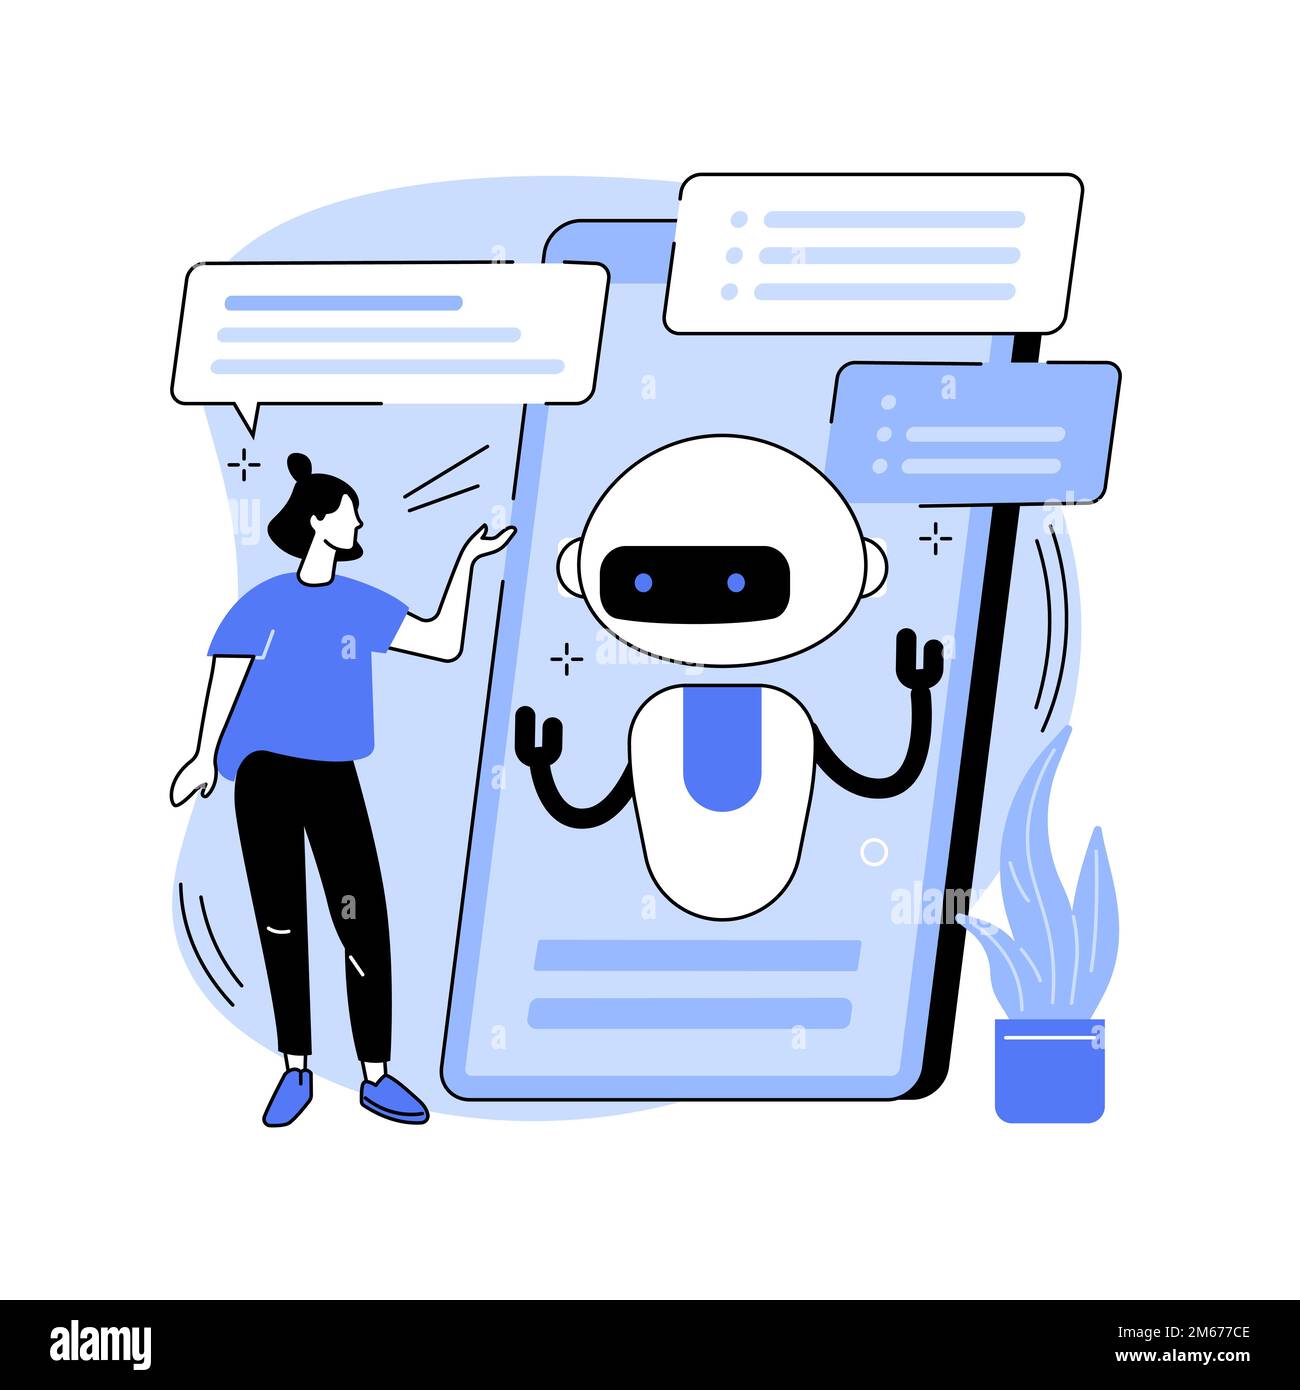 Chatbot virtual assistant abstract concept vector illustration. internet, online smart robot, device conversation, media dialog, system project, techn Stock Vector